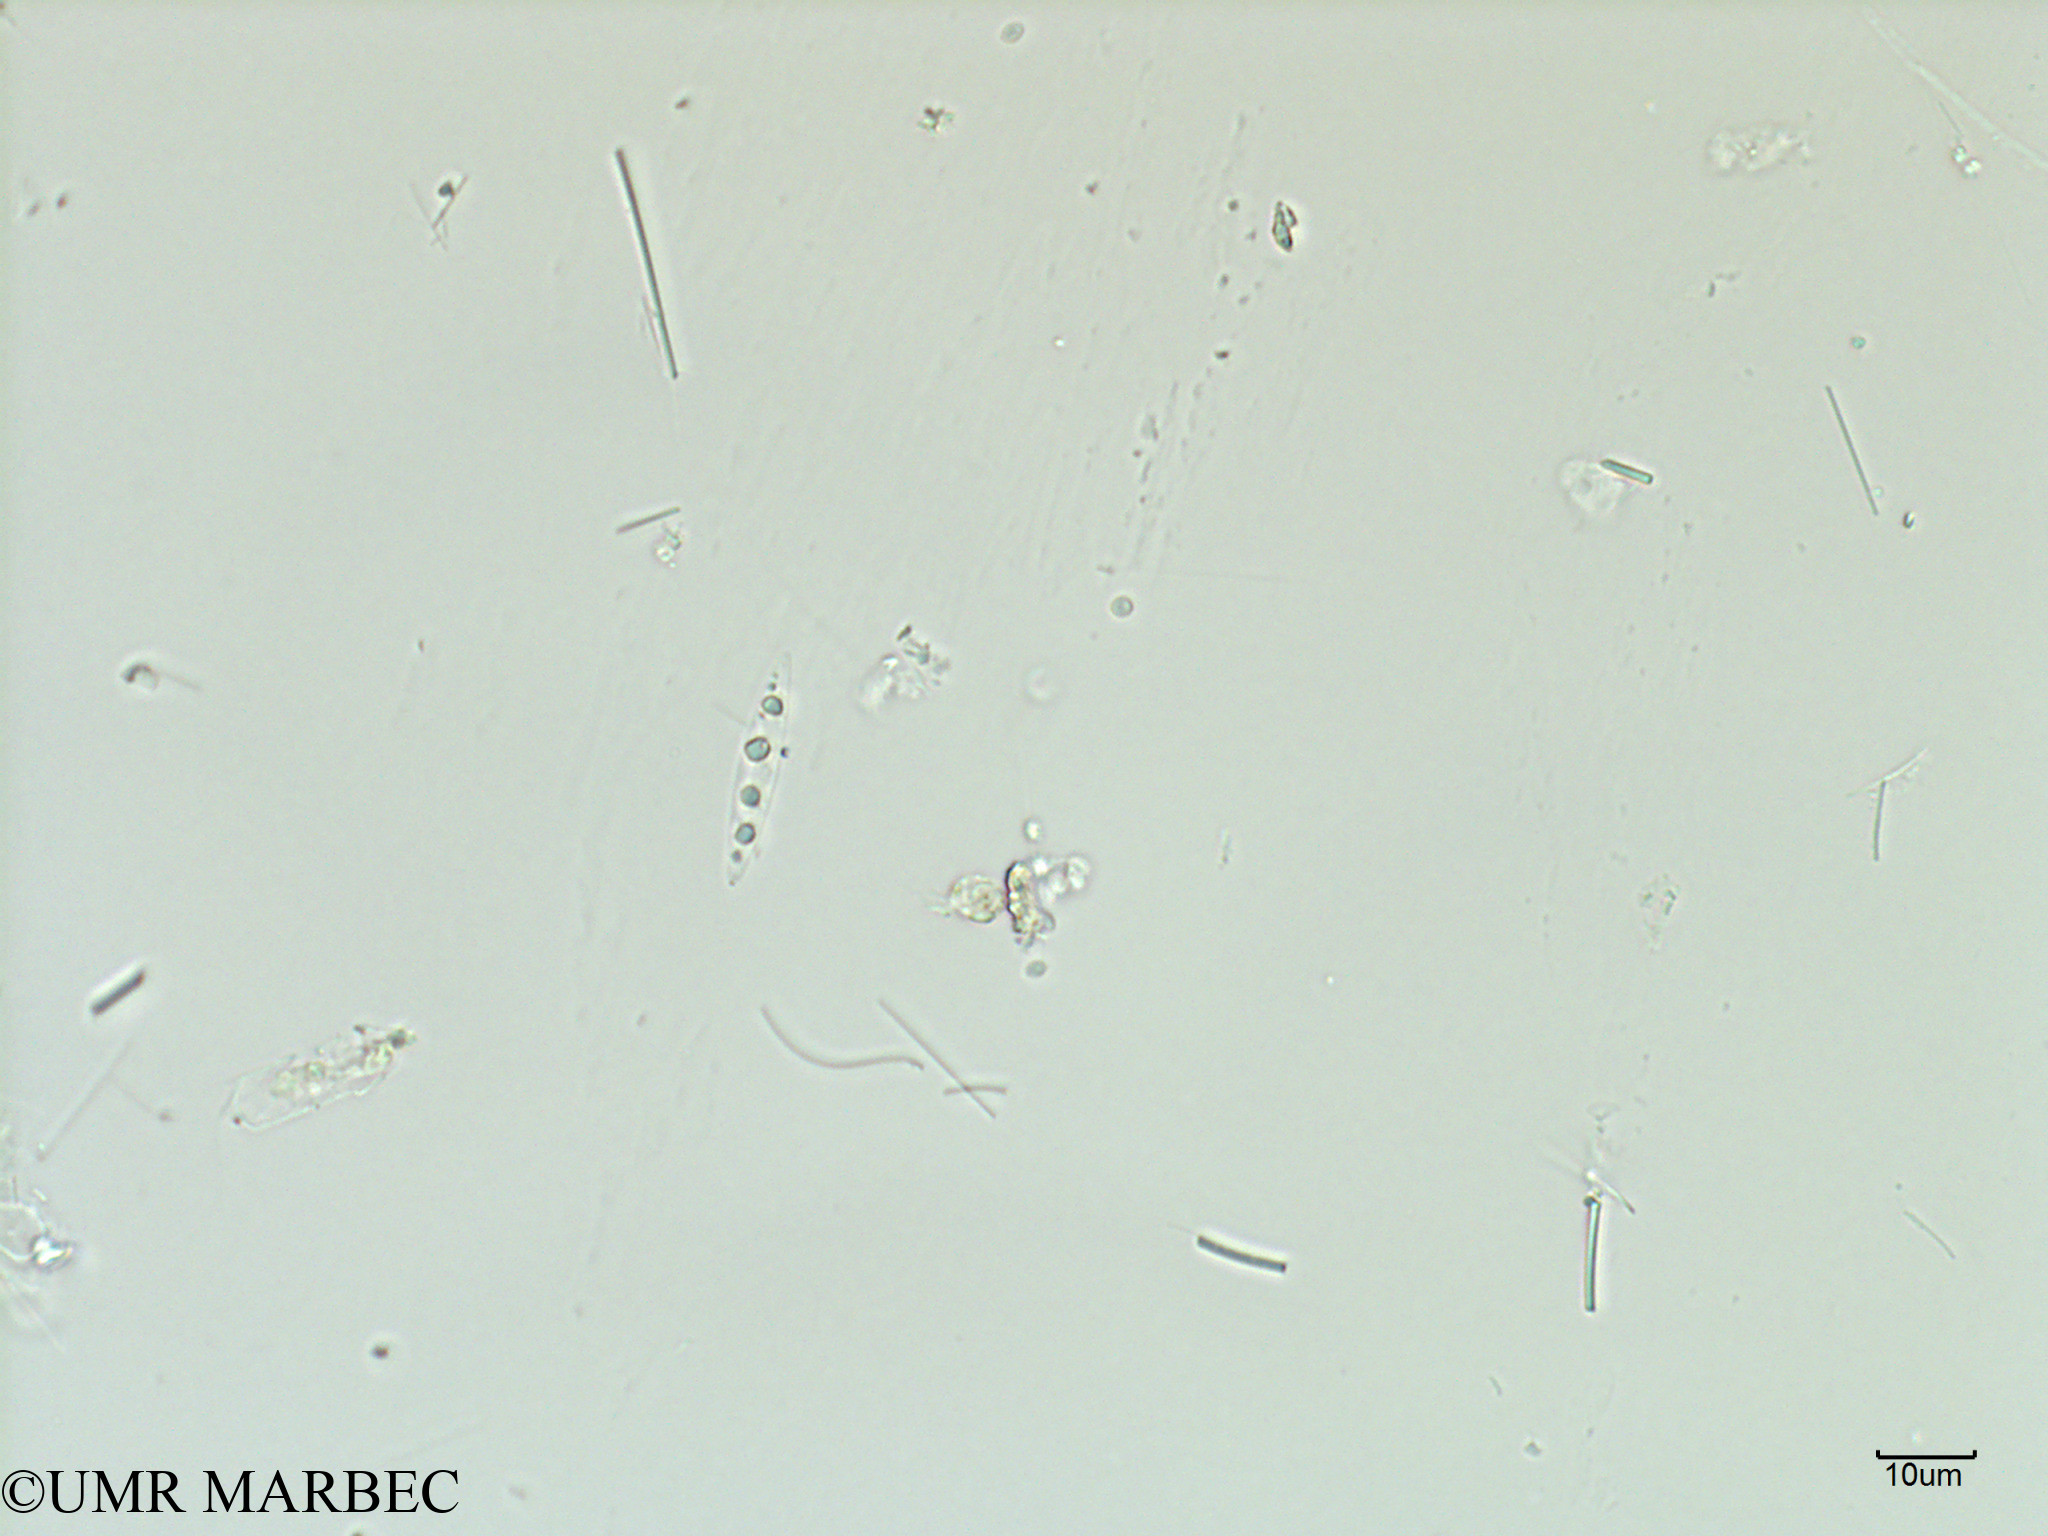 phyto/Scattered_Islands/iles_glorieuses/SIREME May 2016/Pennée spp 3-5x15-40µm (SIREME-Glorieuses2016-GLO6surf-271016-pennée moy)(copy).jpg